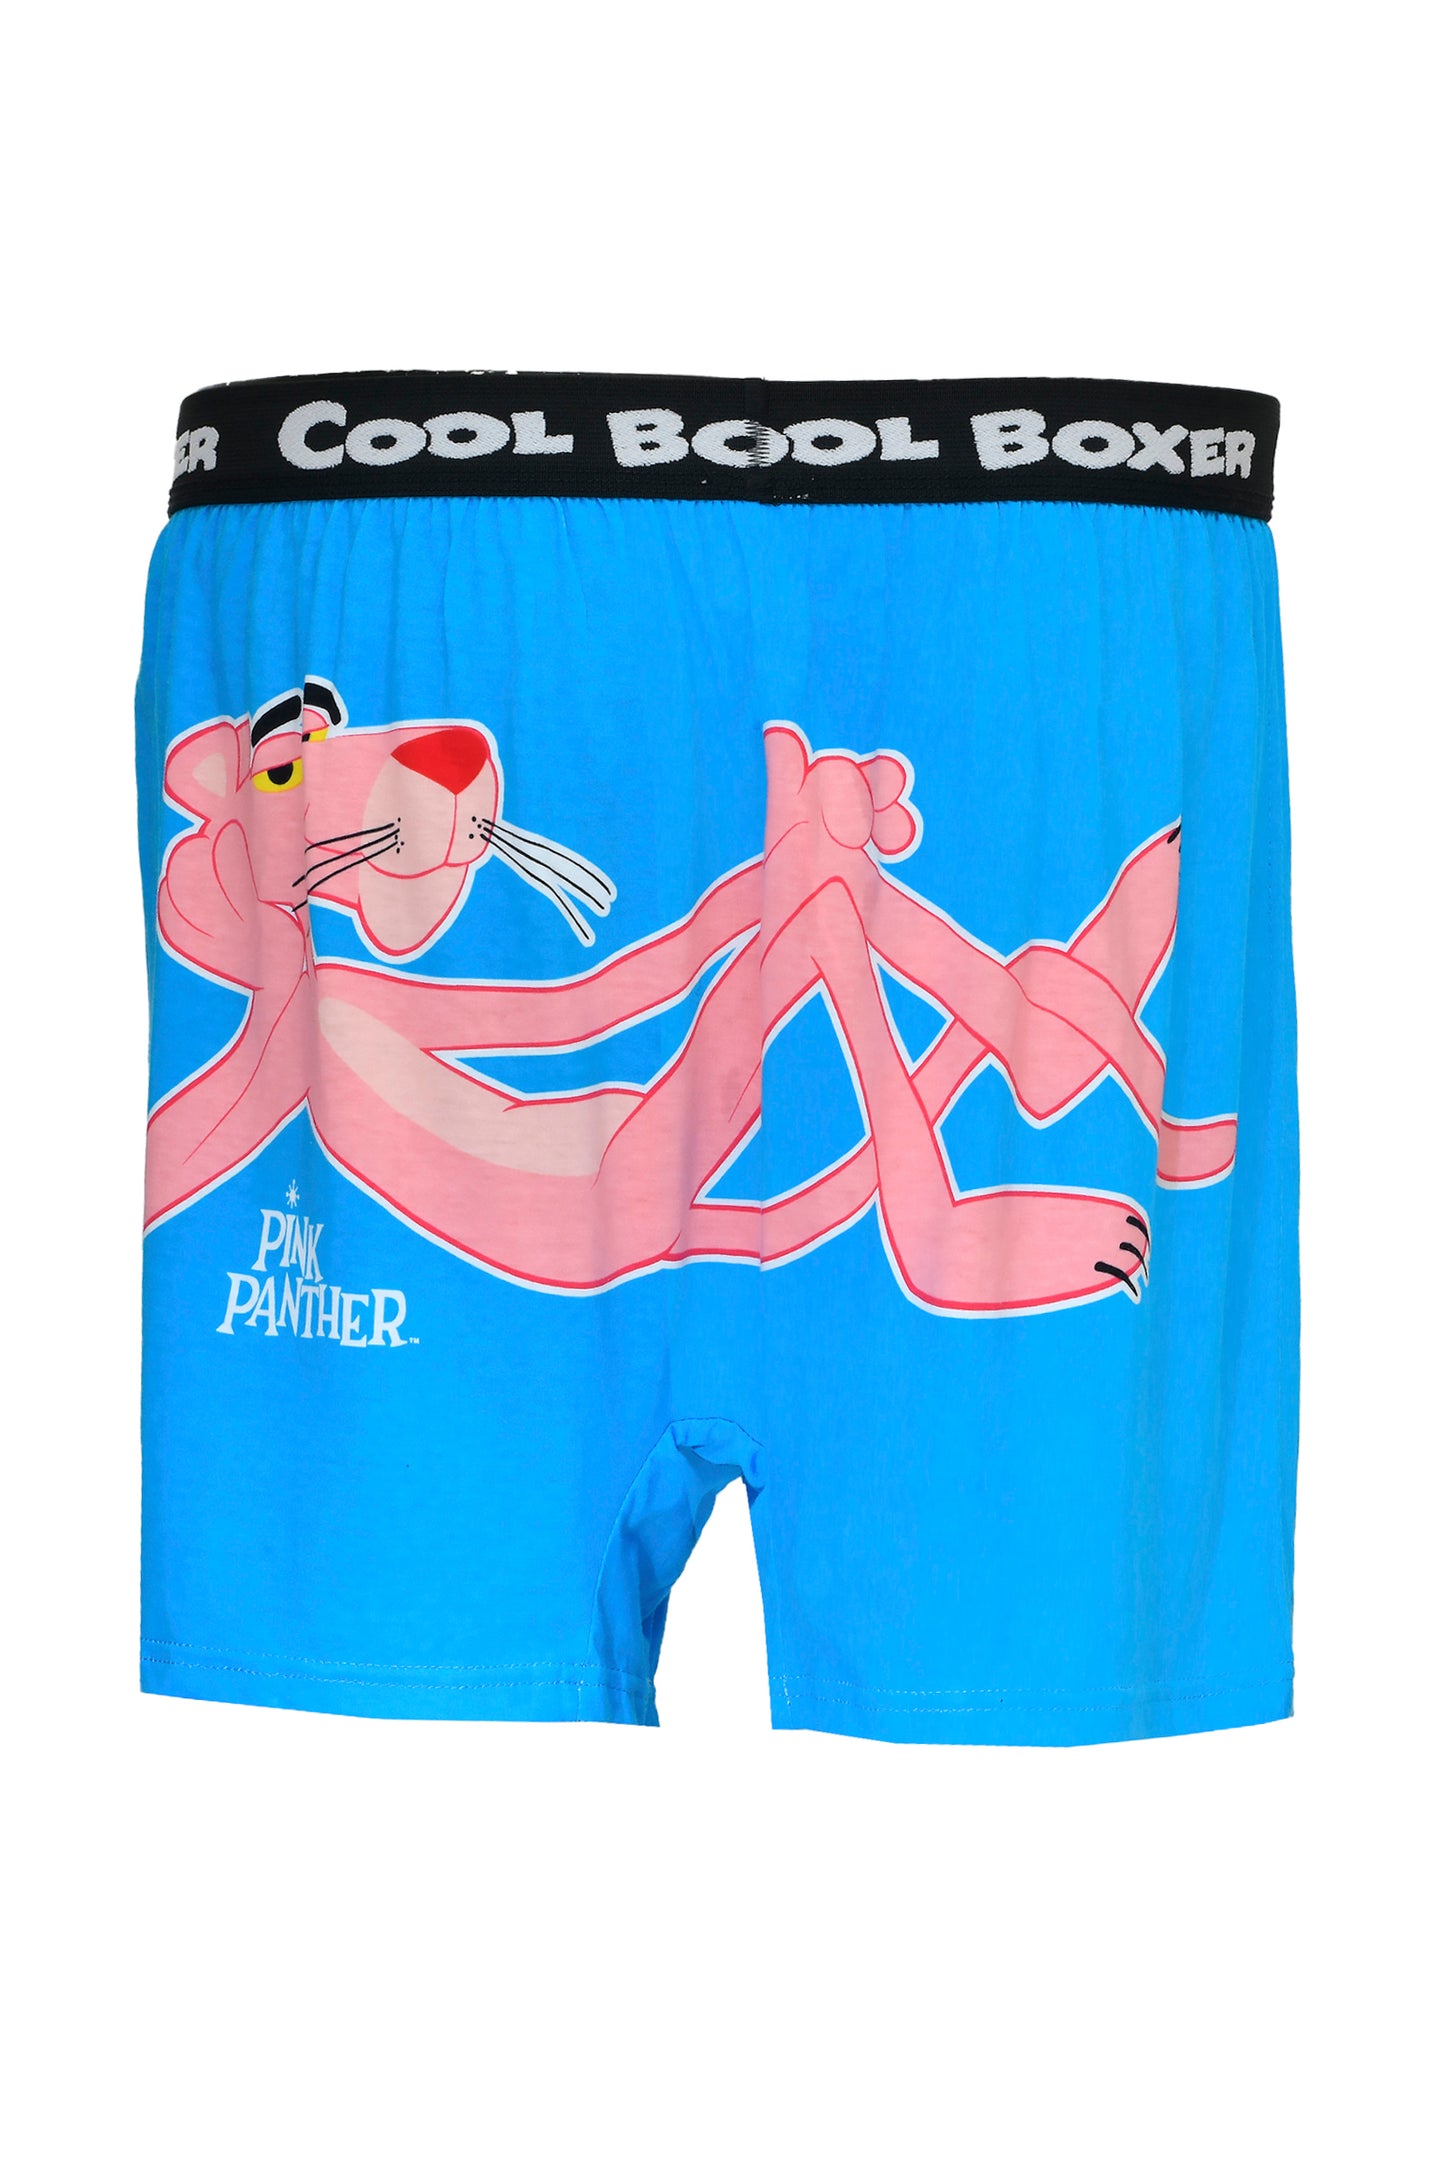 Men "WHO'S YOUR PANTHER" Cartoon Boxer